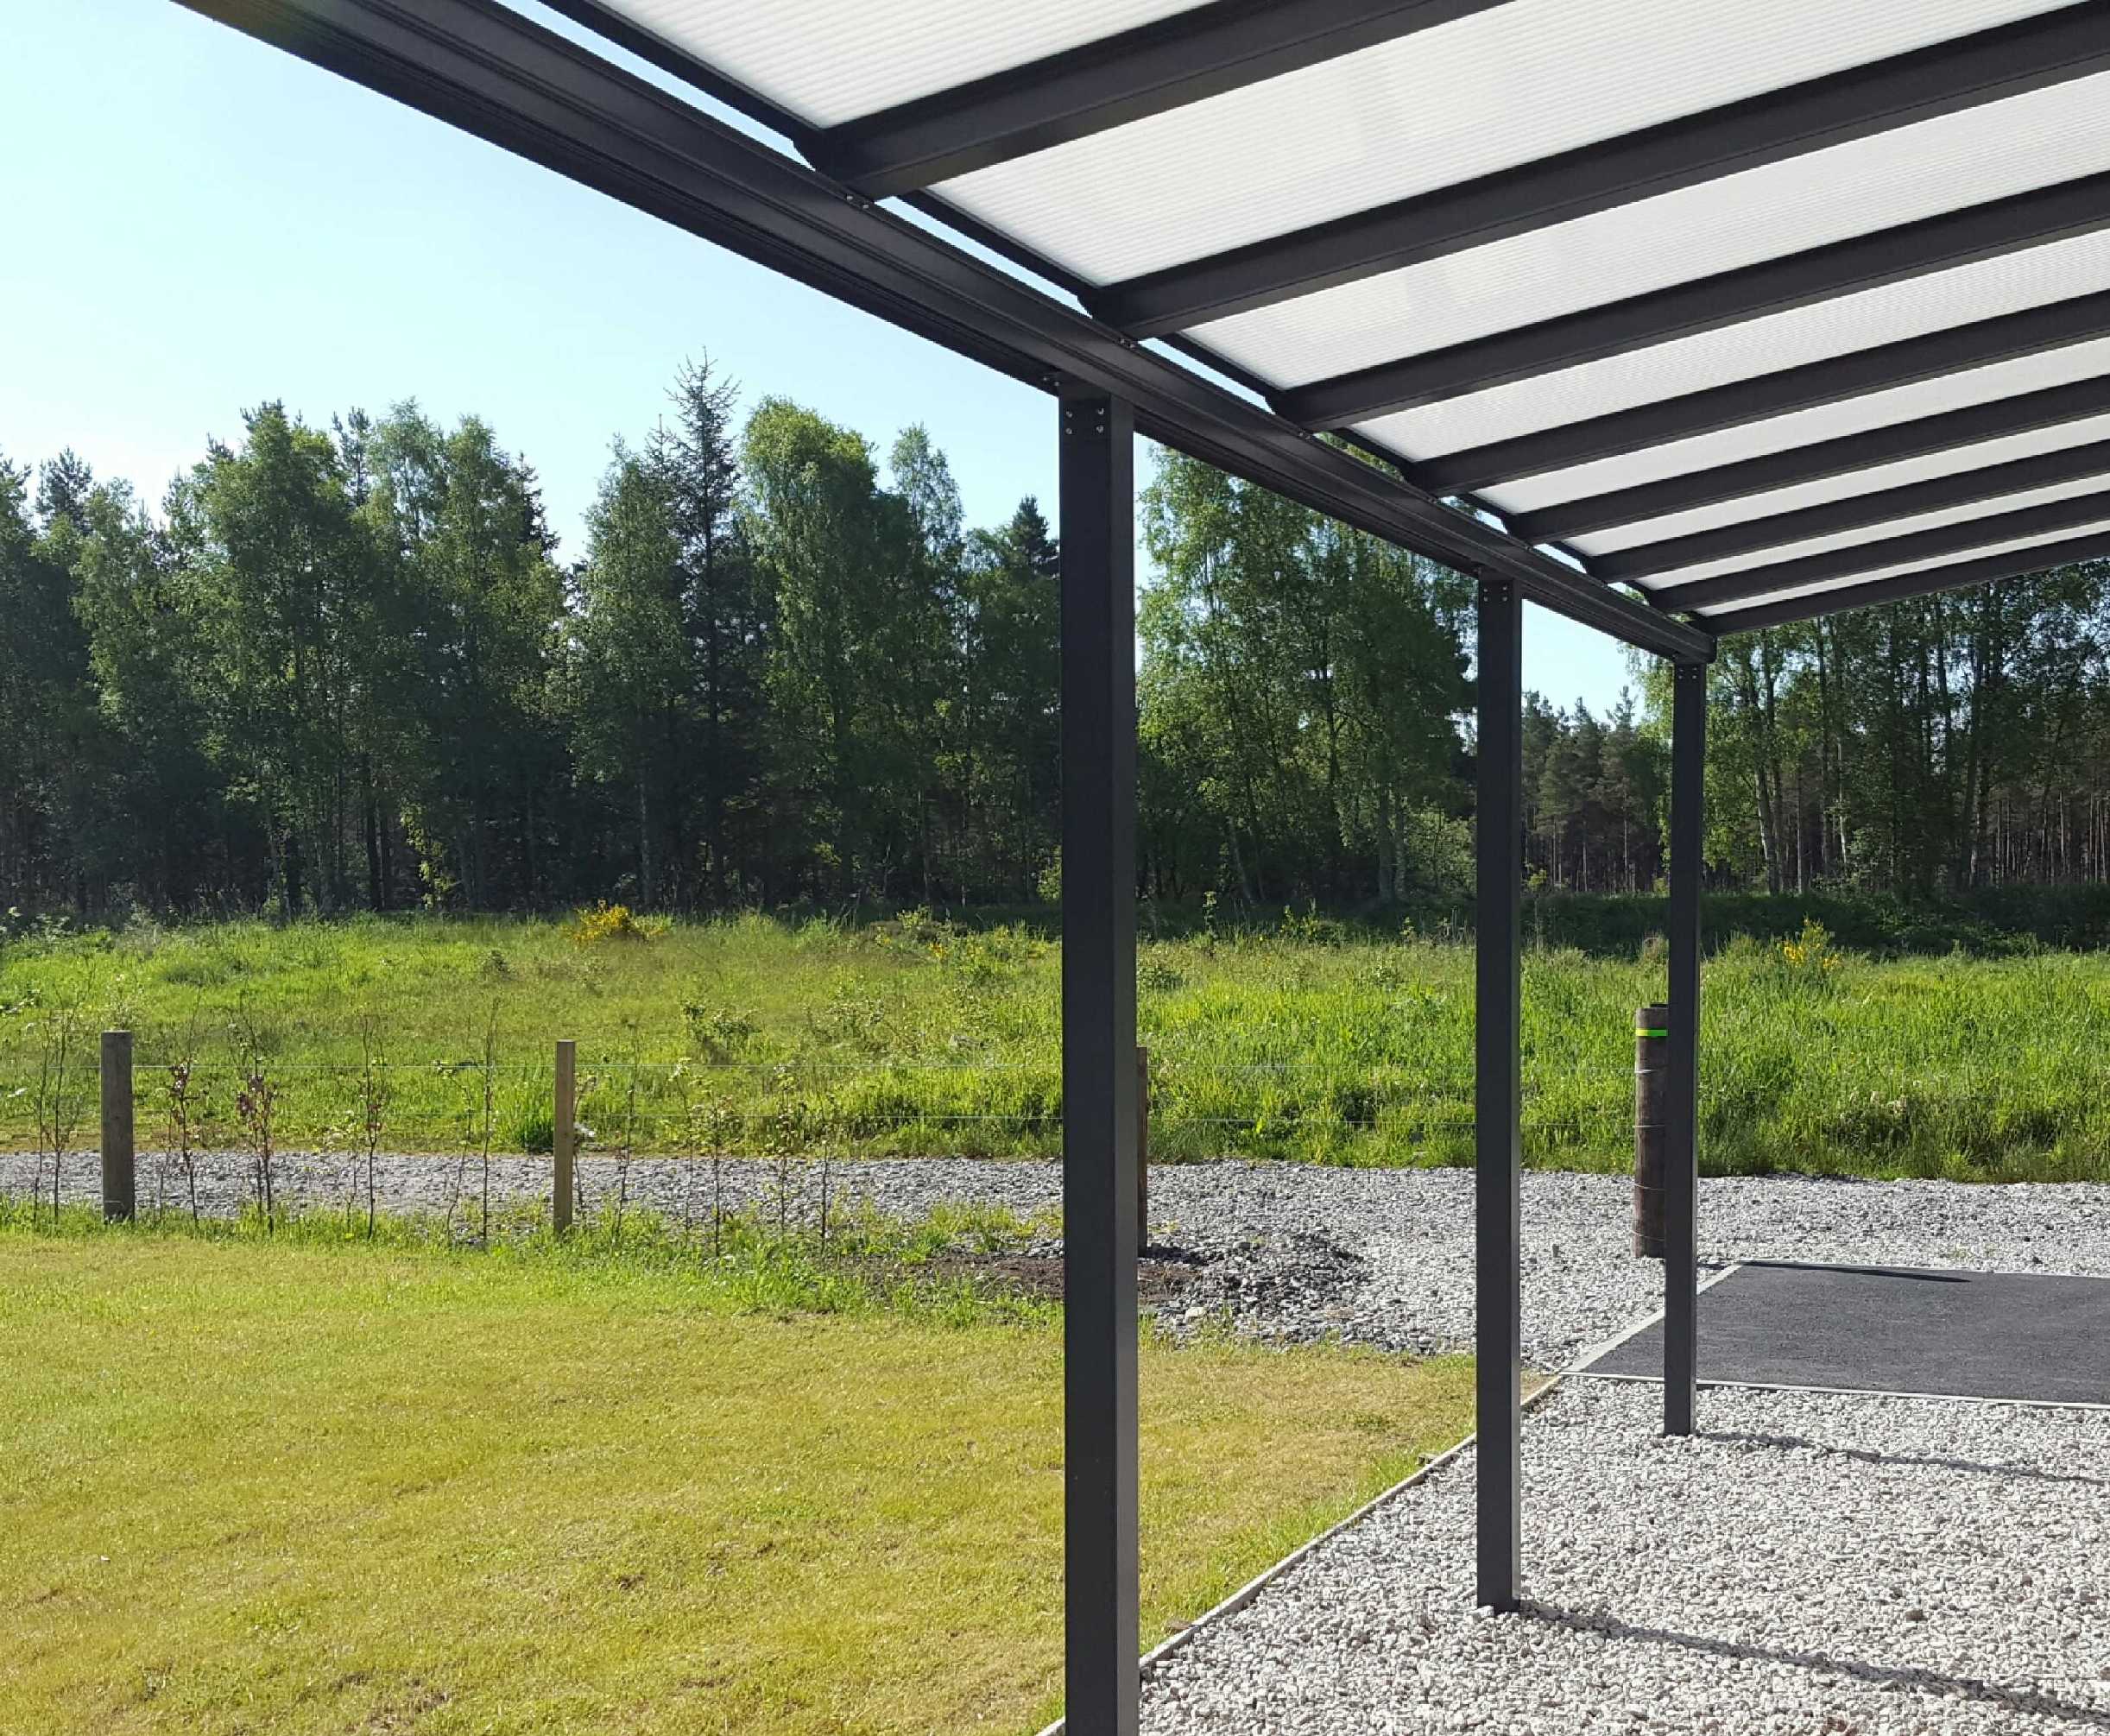 SPECIAL OFFER Omega Smart Lean-To Canopy, Anthracite Grey, 16mm Polycarbonate Glazing - 2.5m (W) x 3.0m (P), (2) Supporting Posts